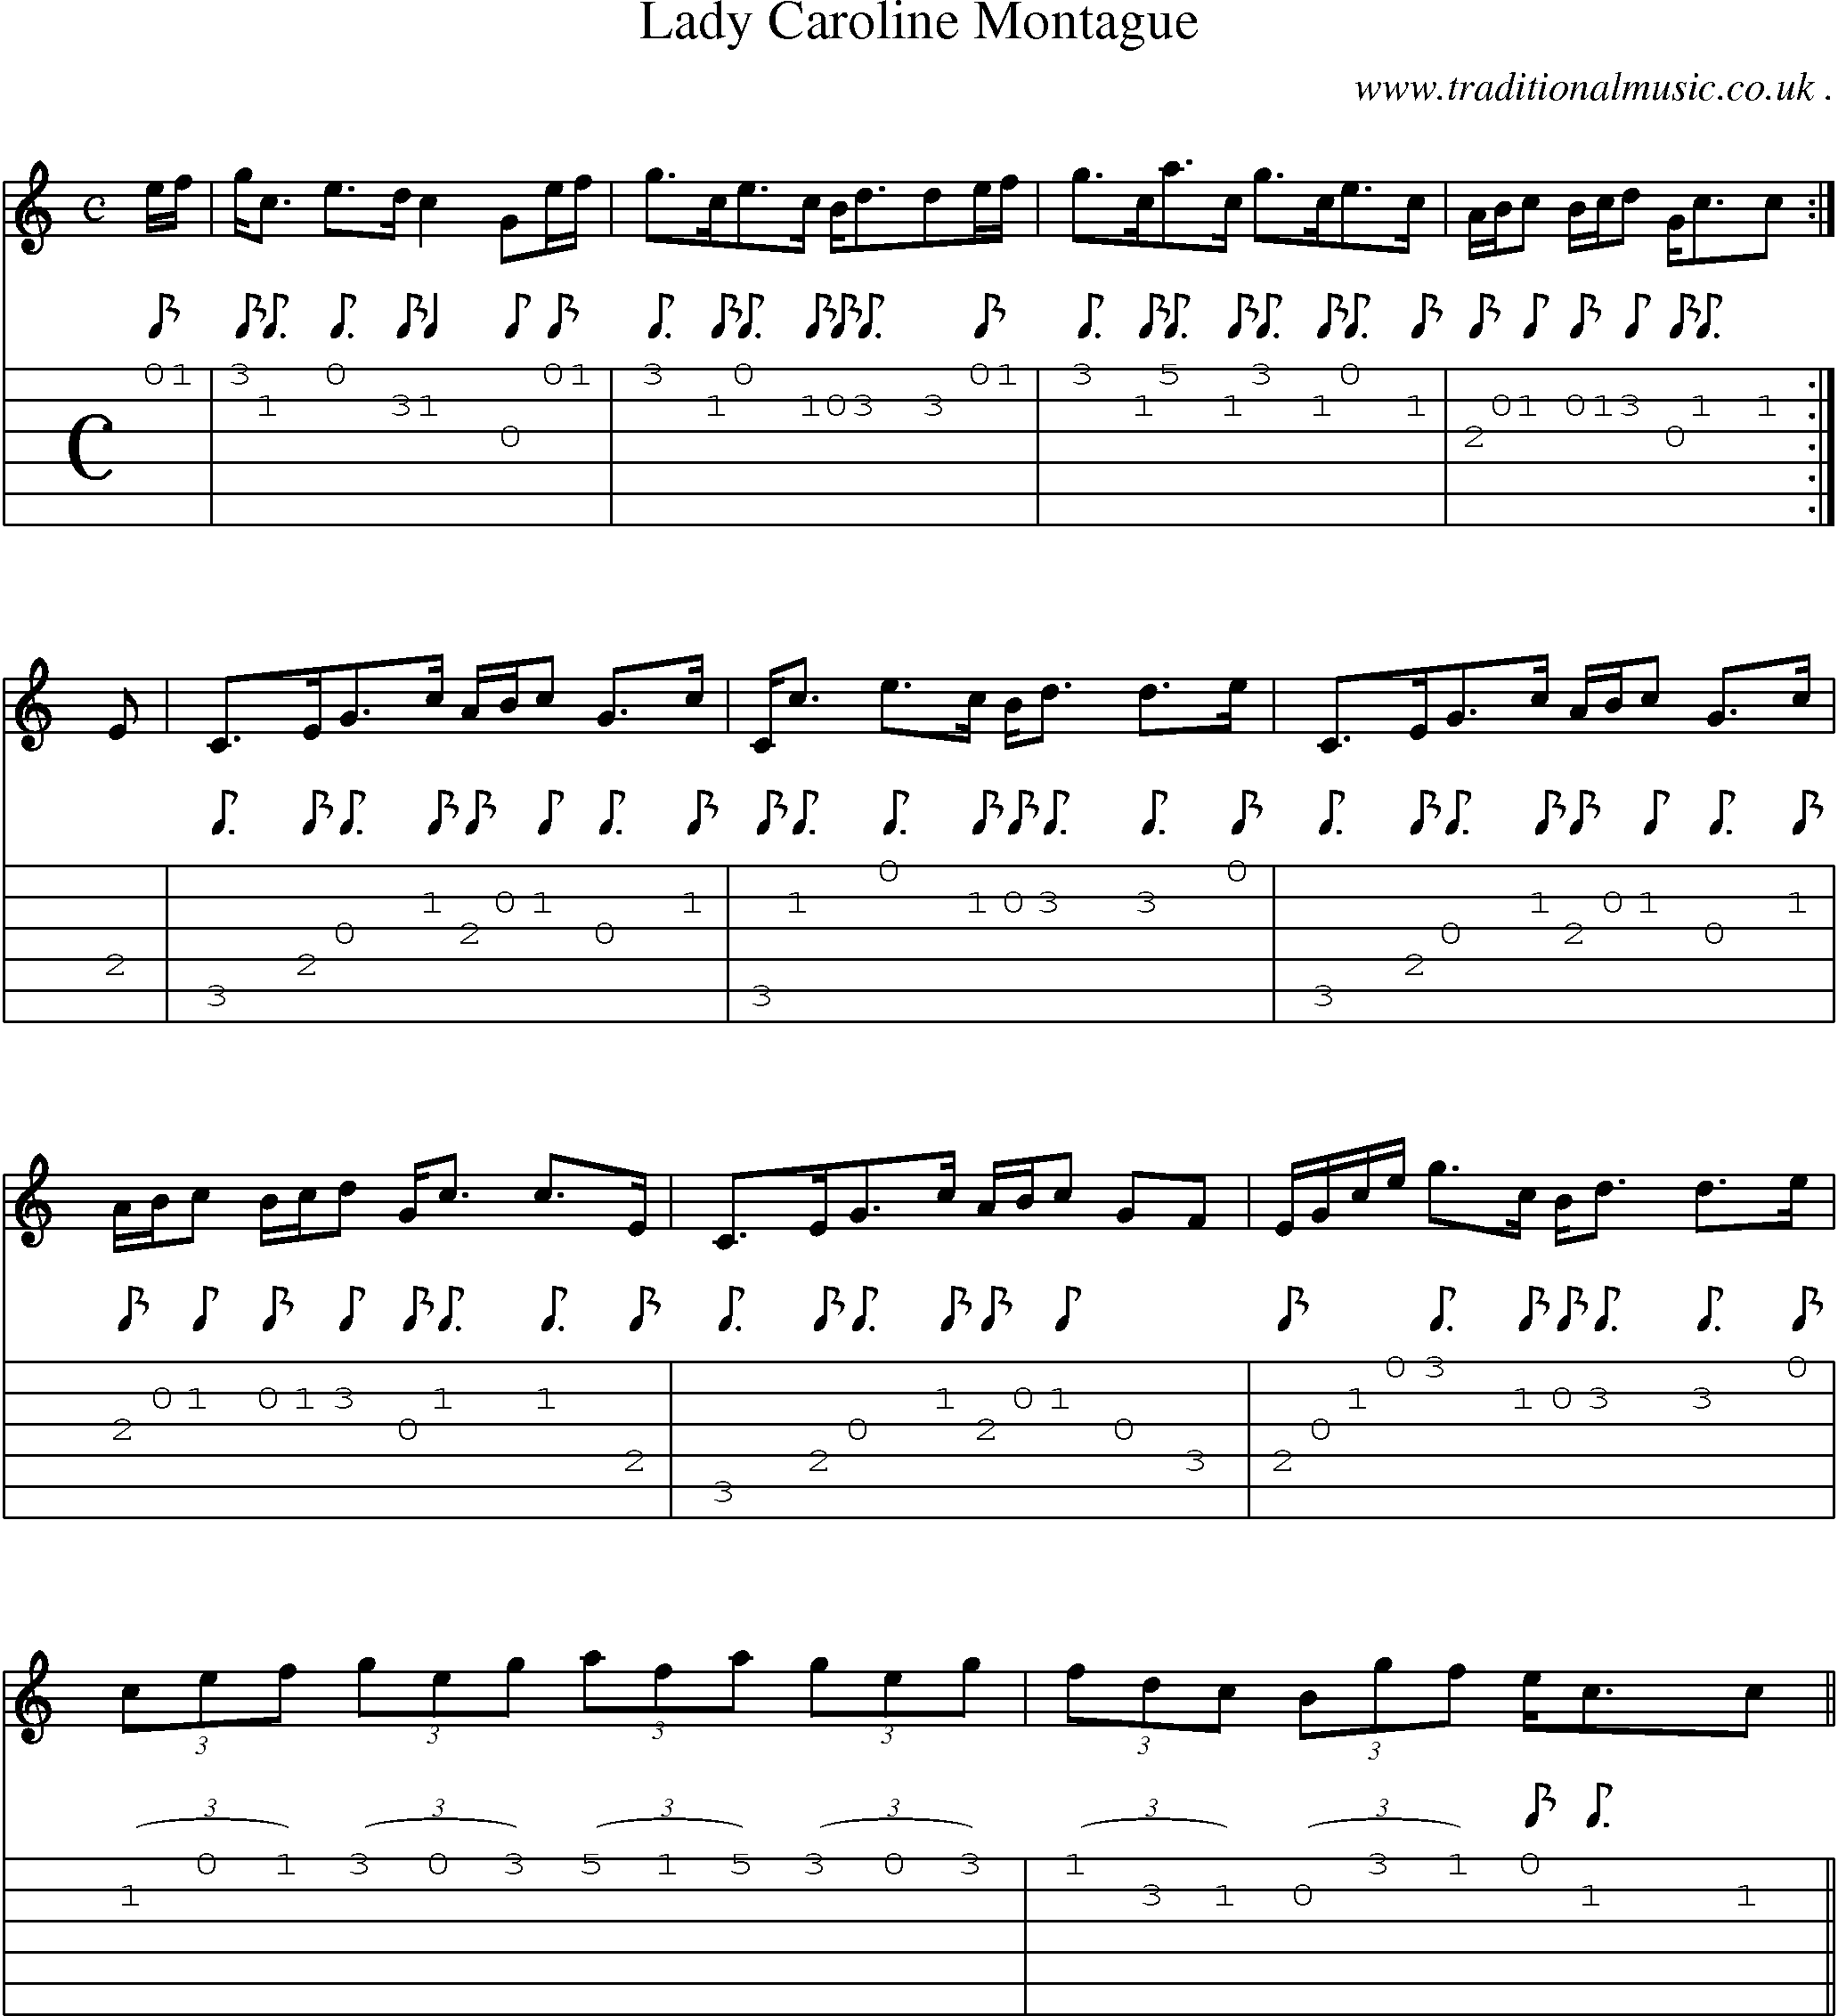 Sheet-music  score, Chords and Guitar Tabs for Lady Caroline Montague